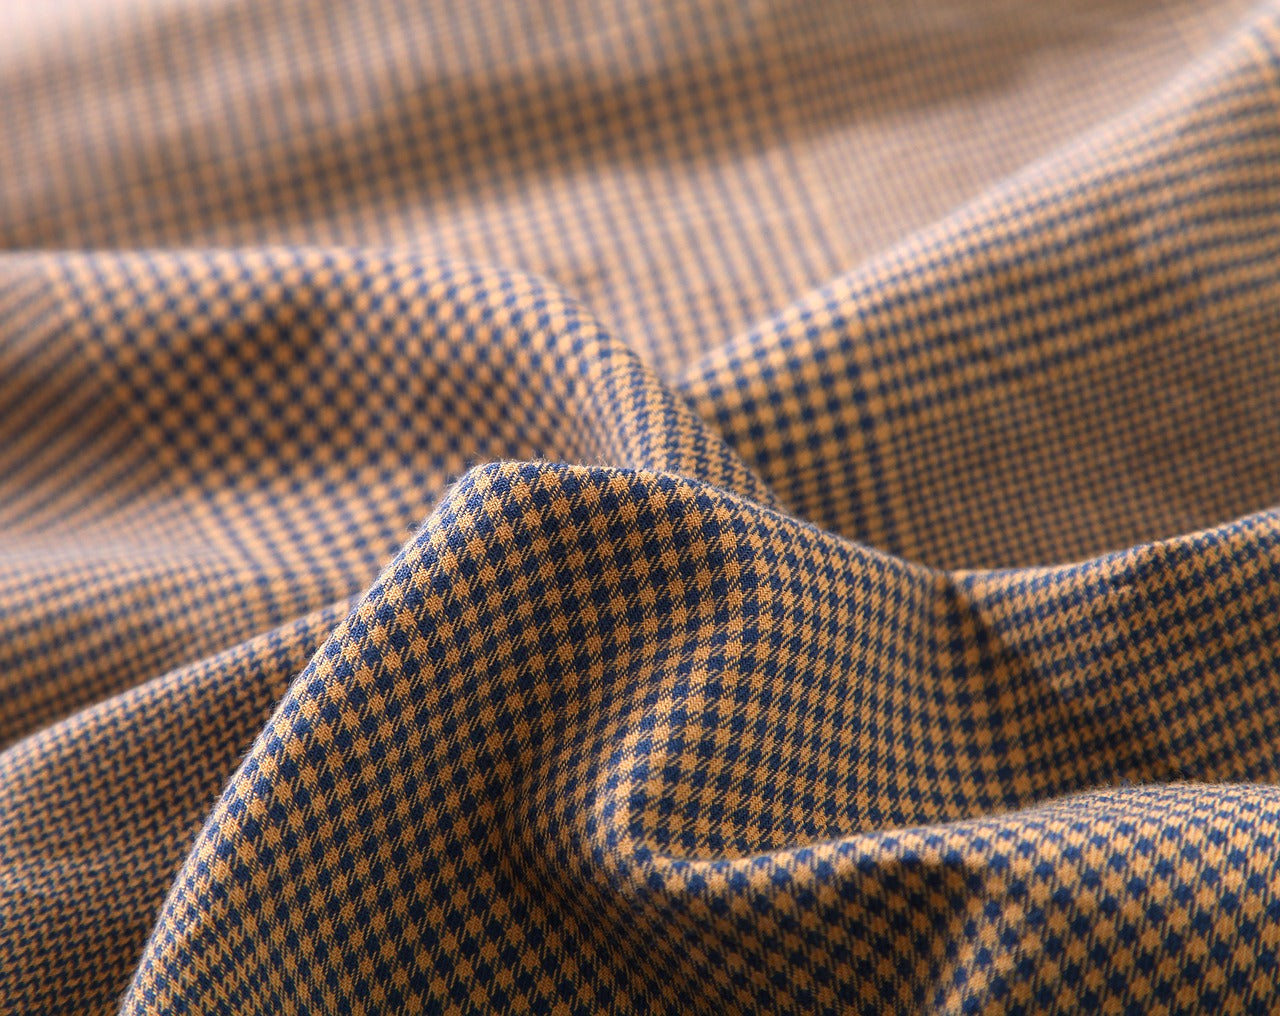 Fabrics and Textiles: Houndstooth Check - The Cutting Class